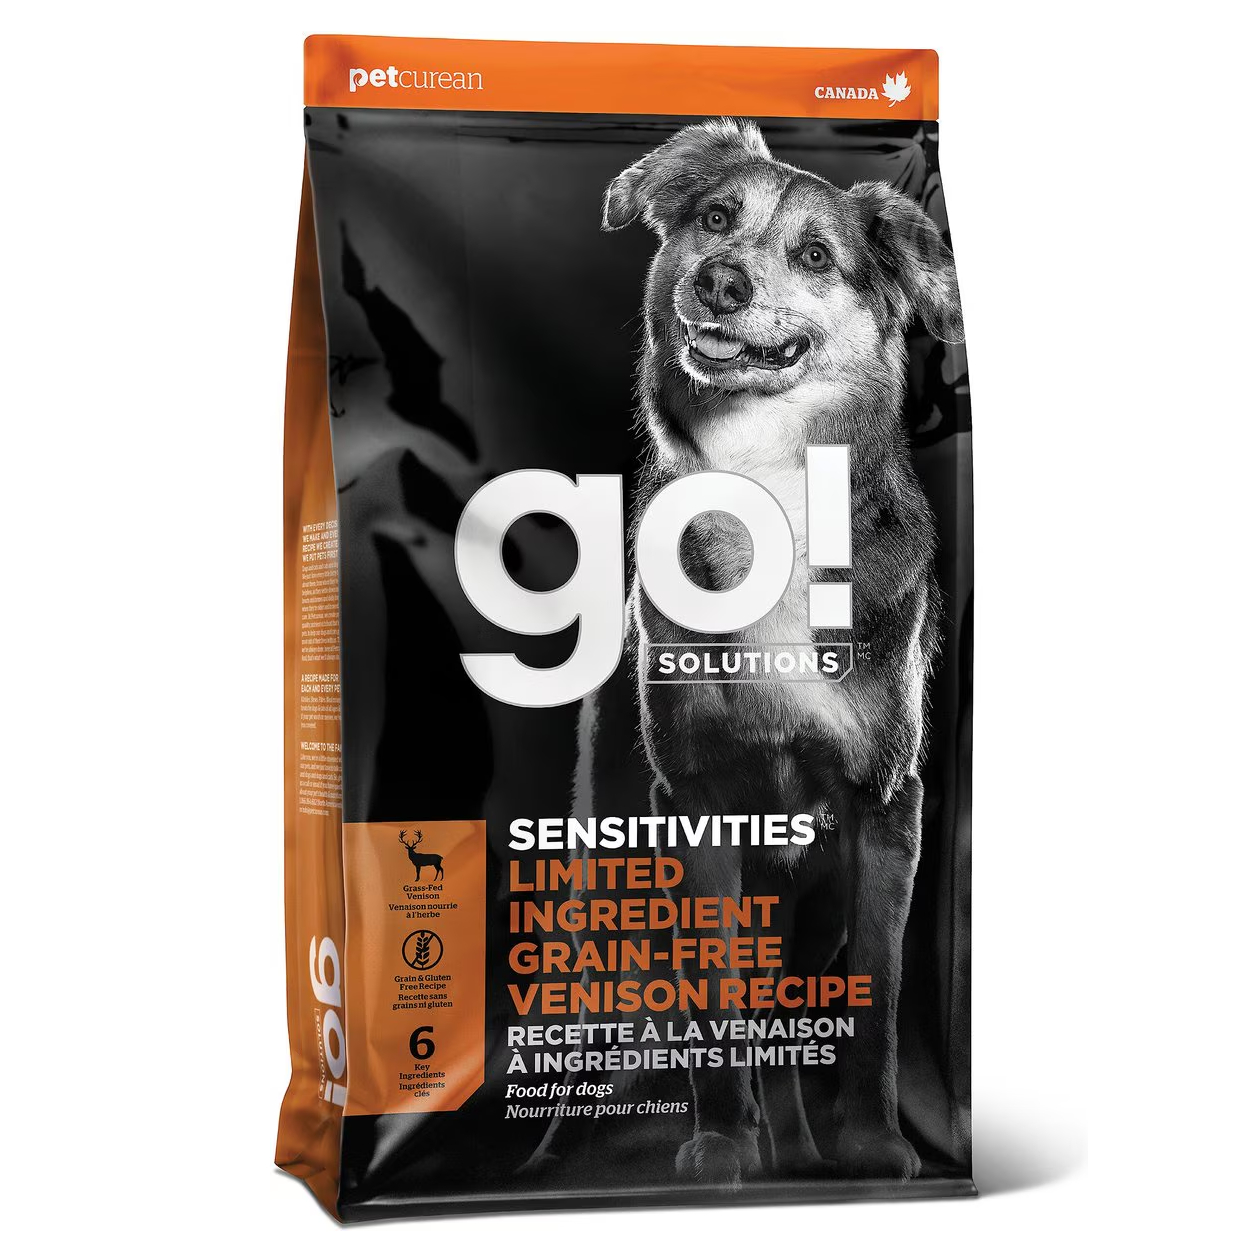 Go! SENSITIVITIES Limited Ingredient Dry Dog Food